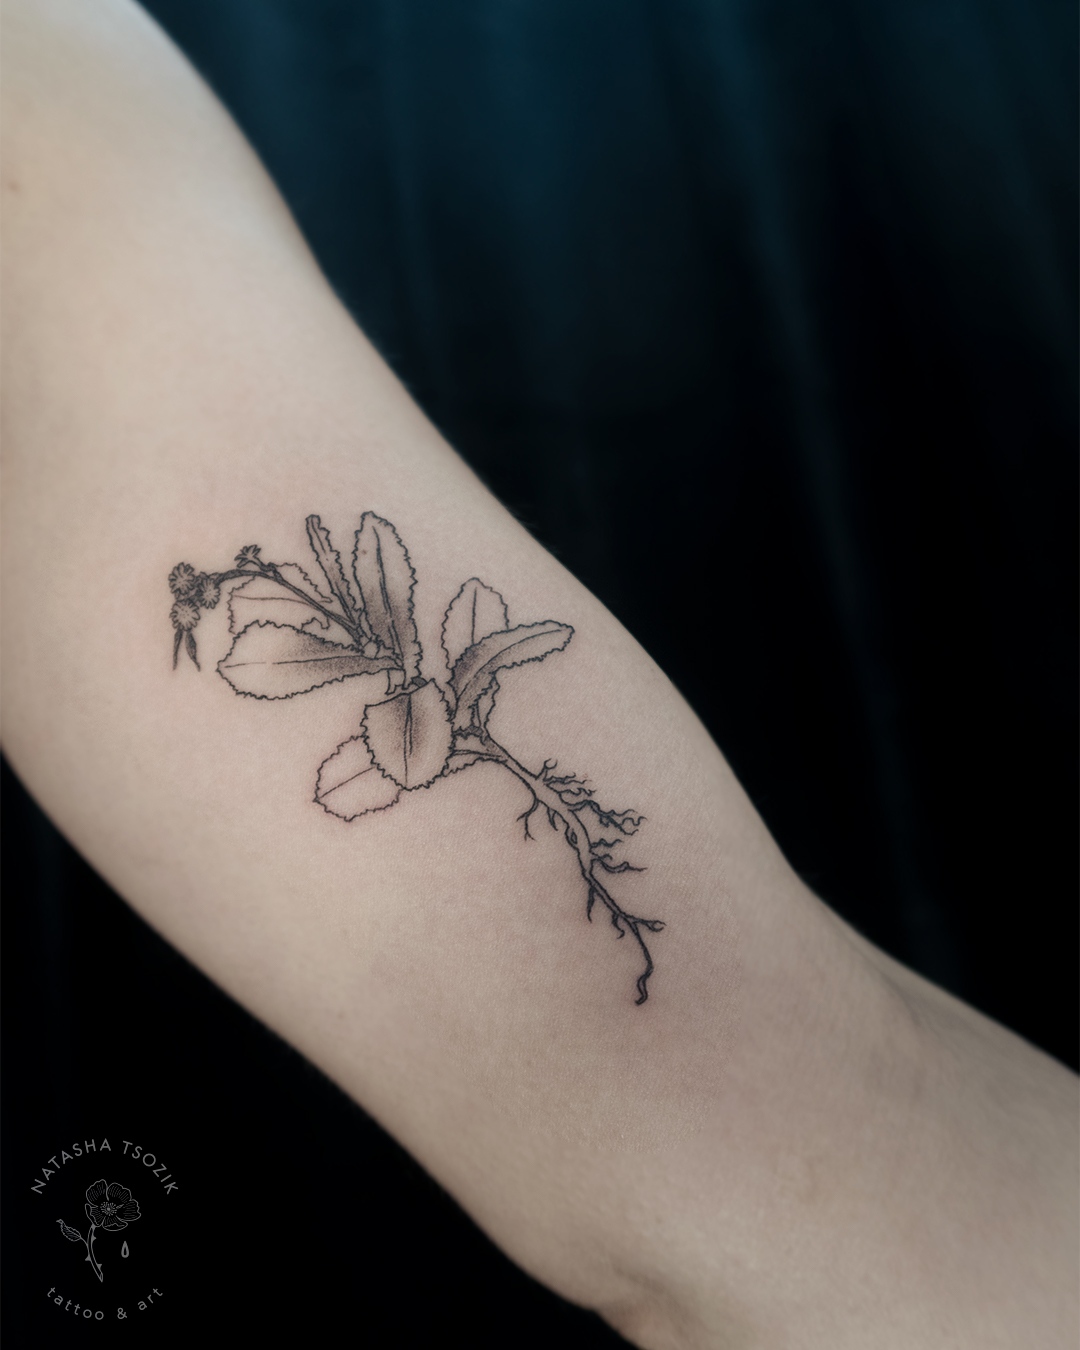 Herbs and roots tattoo on an inner bicep.